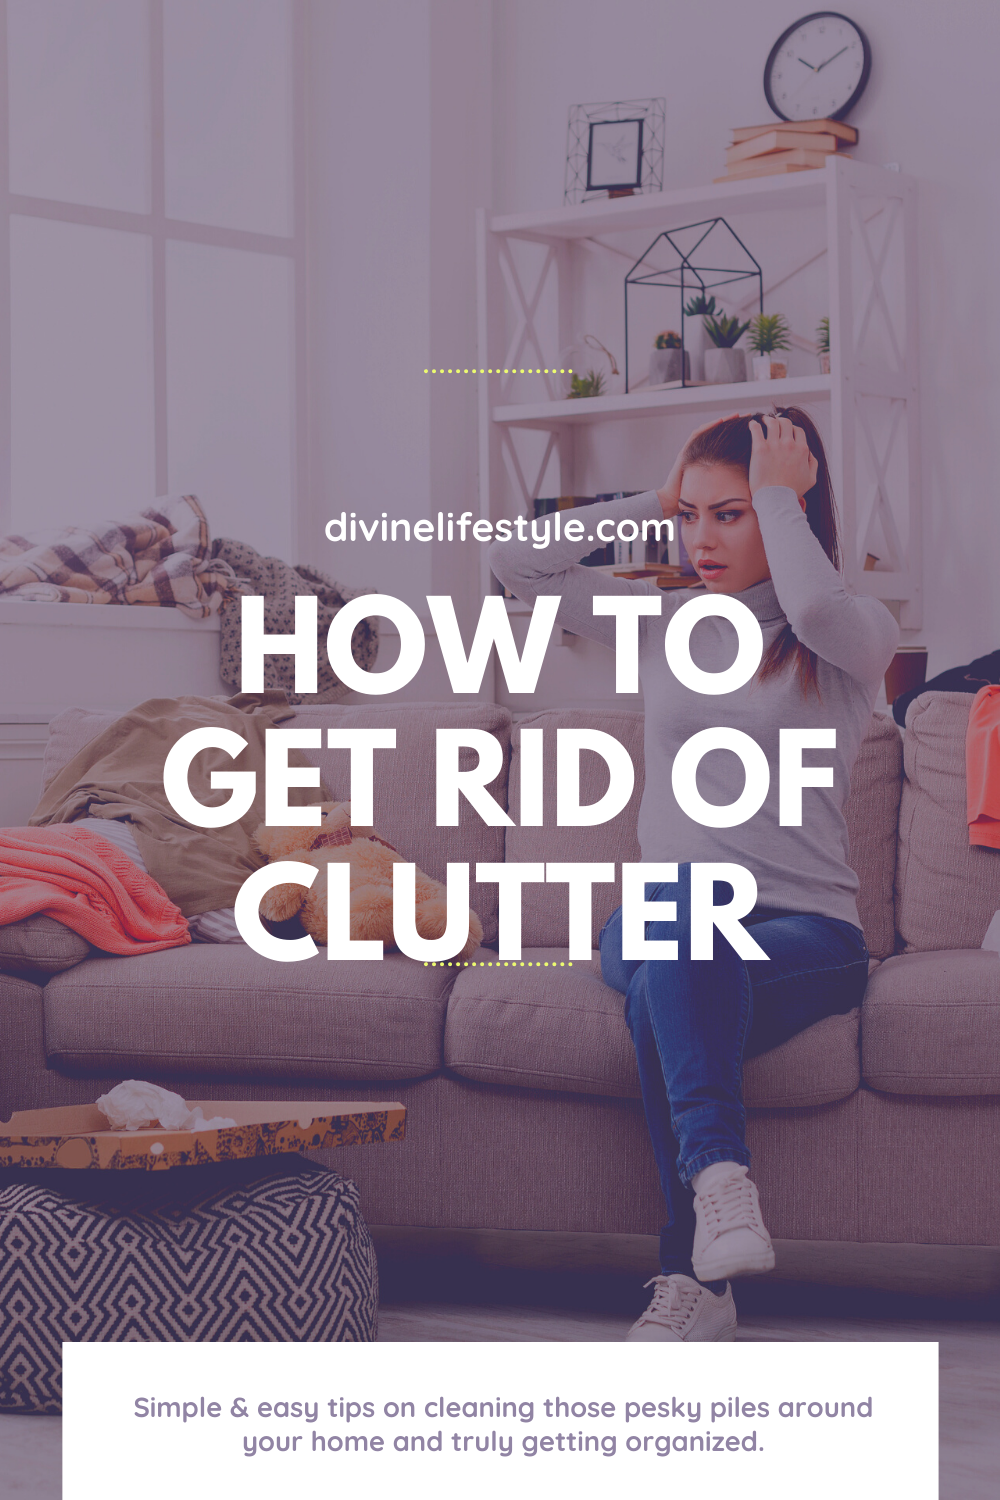 How to Get Rid of Clutter